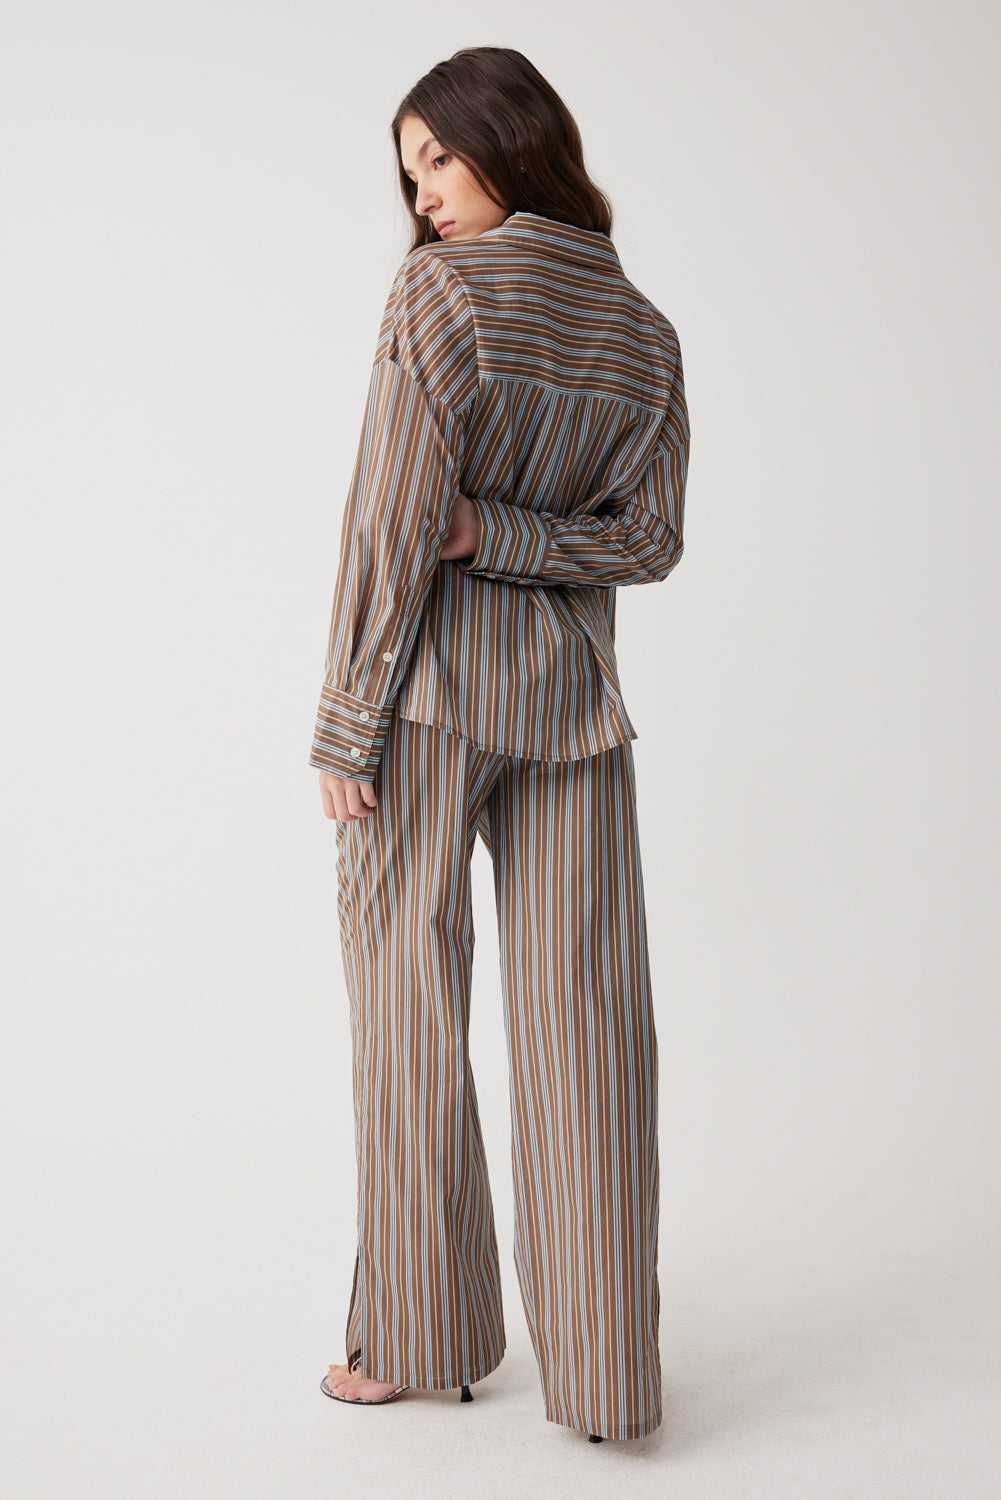 Daisy Striped Low Rise Pant - Ocean Stone